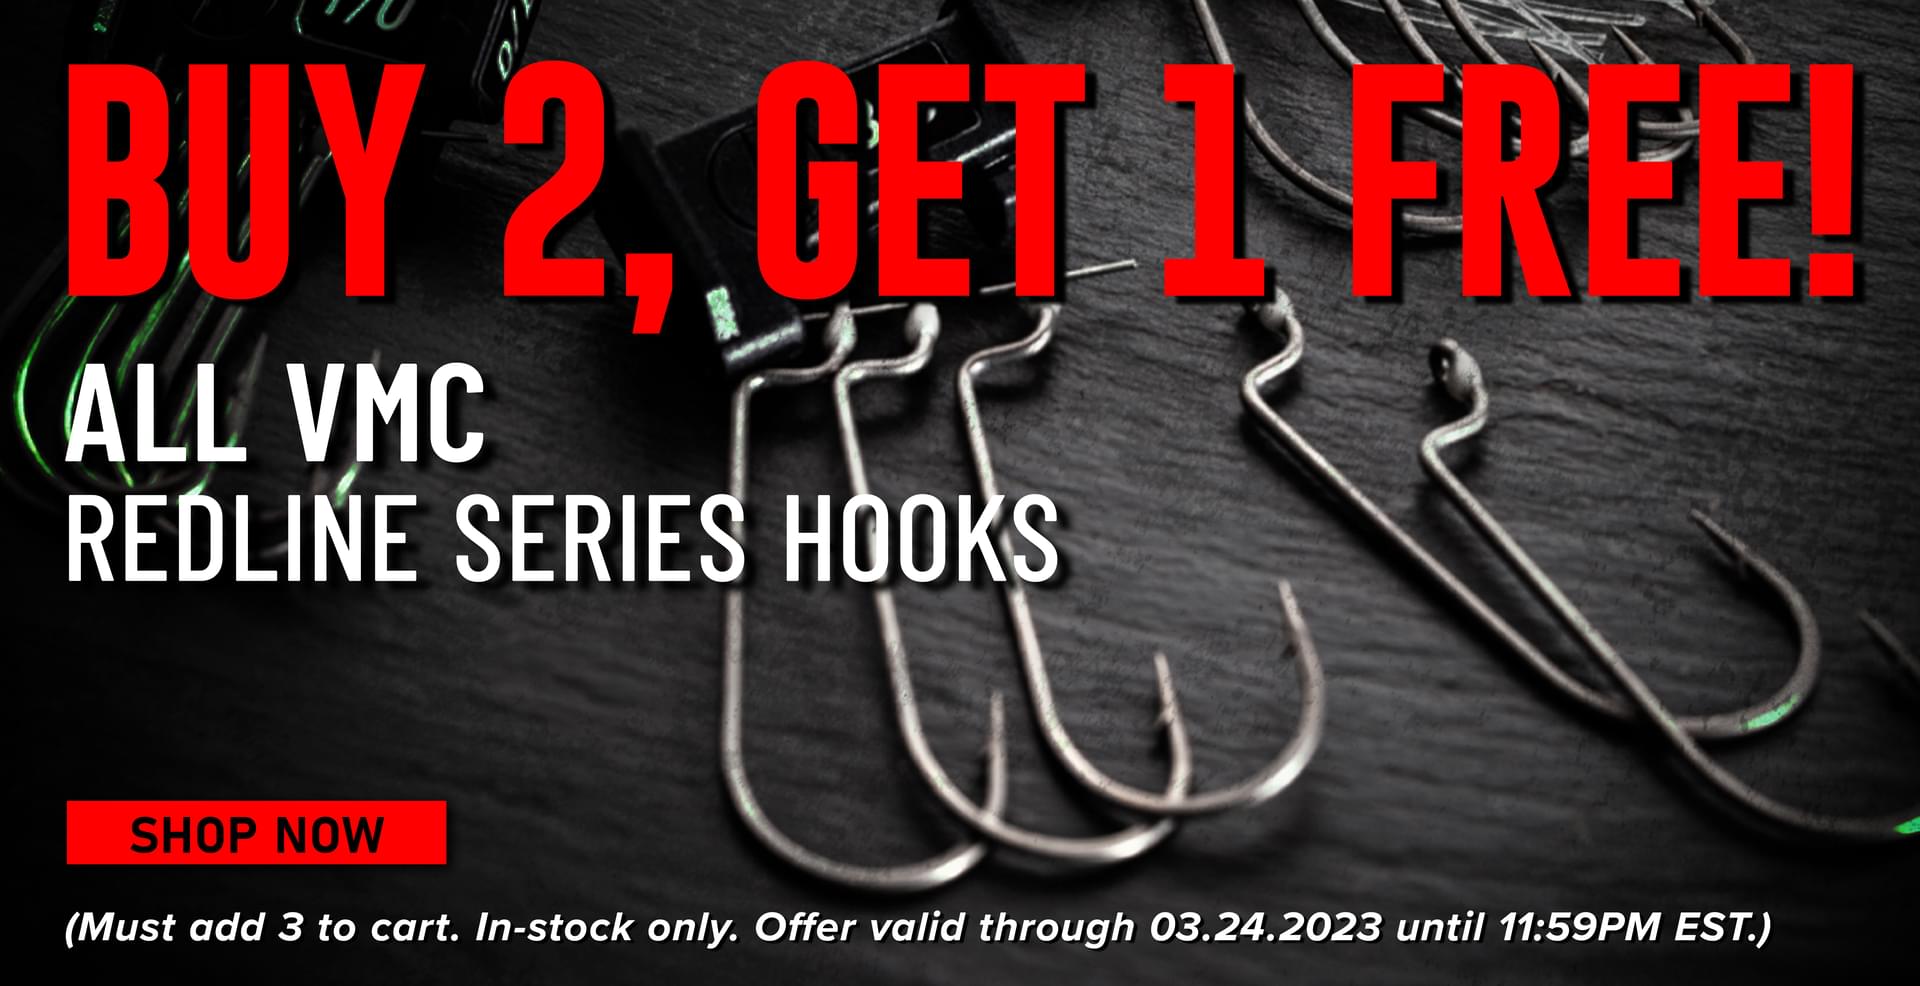 Buy 2, Get 1 Free! All VMC Redline Series Hooks Shop Now (Must add 3 to cart. In-stock only. Offer valid through 03.24.2023 until 11:59PM EST.)  e a.m%m s m . o . . Must add 3 to cart. In-stock only. Offer valid through 03.24.2023 until 11:59PM EST. 